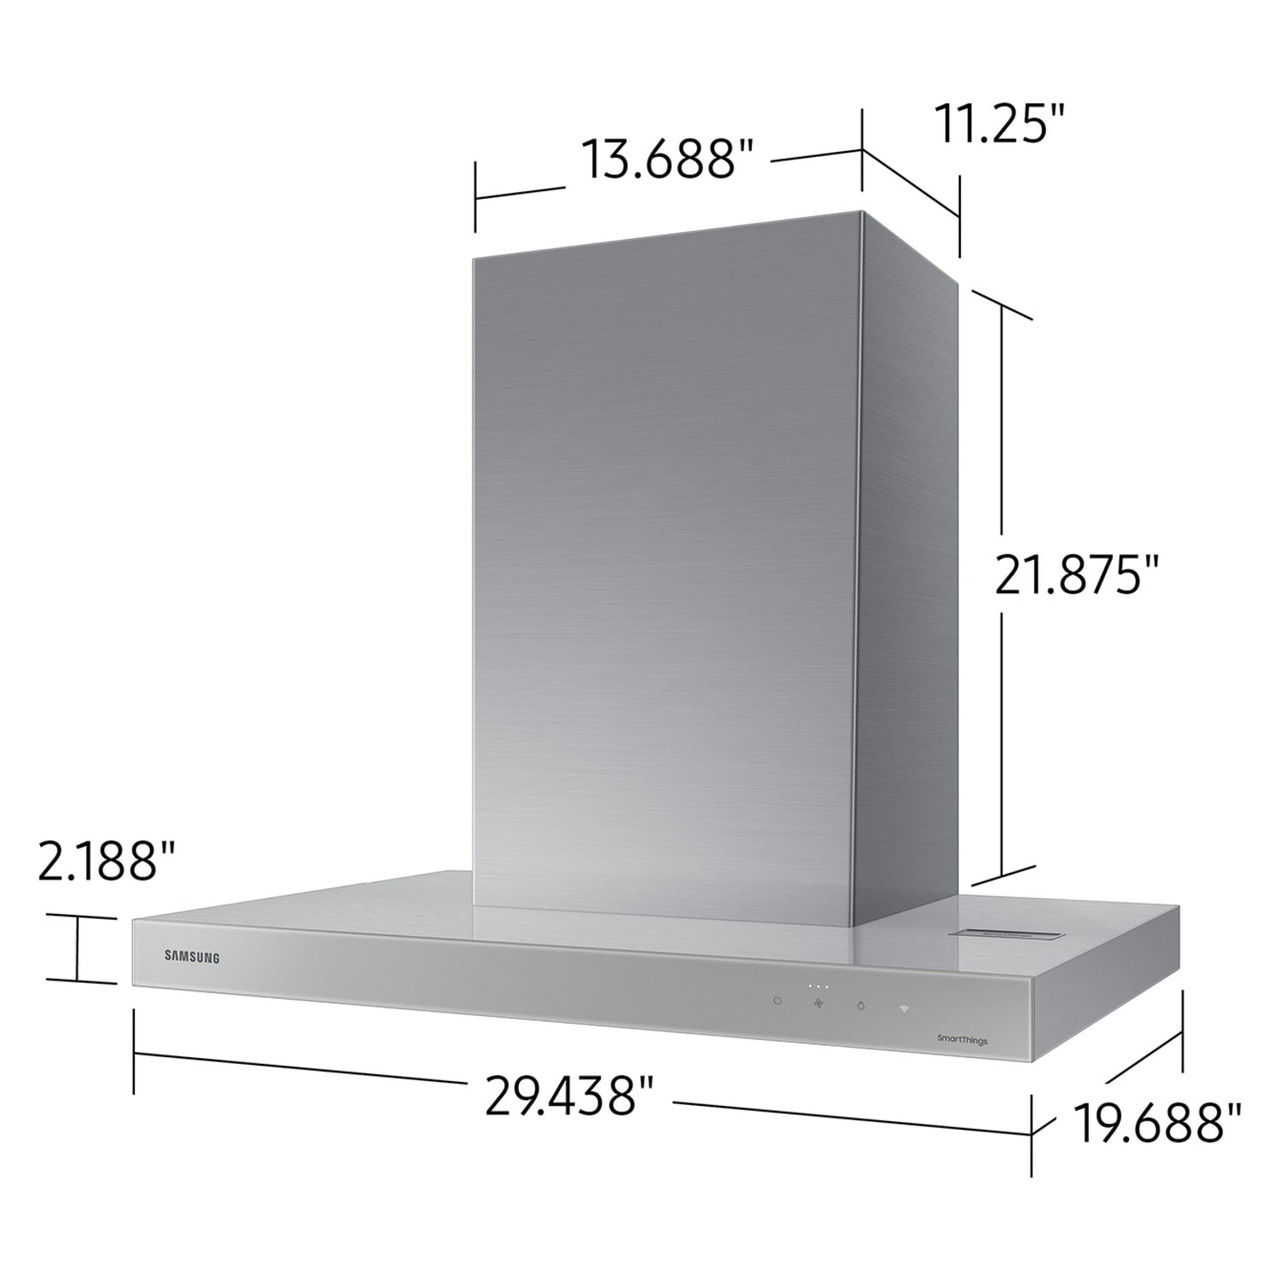 Samsung 30” Bespoke Smart Wall Mount Hood in Clean Gray Panel/Stainless Steel Duct - NK30CB600WCG